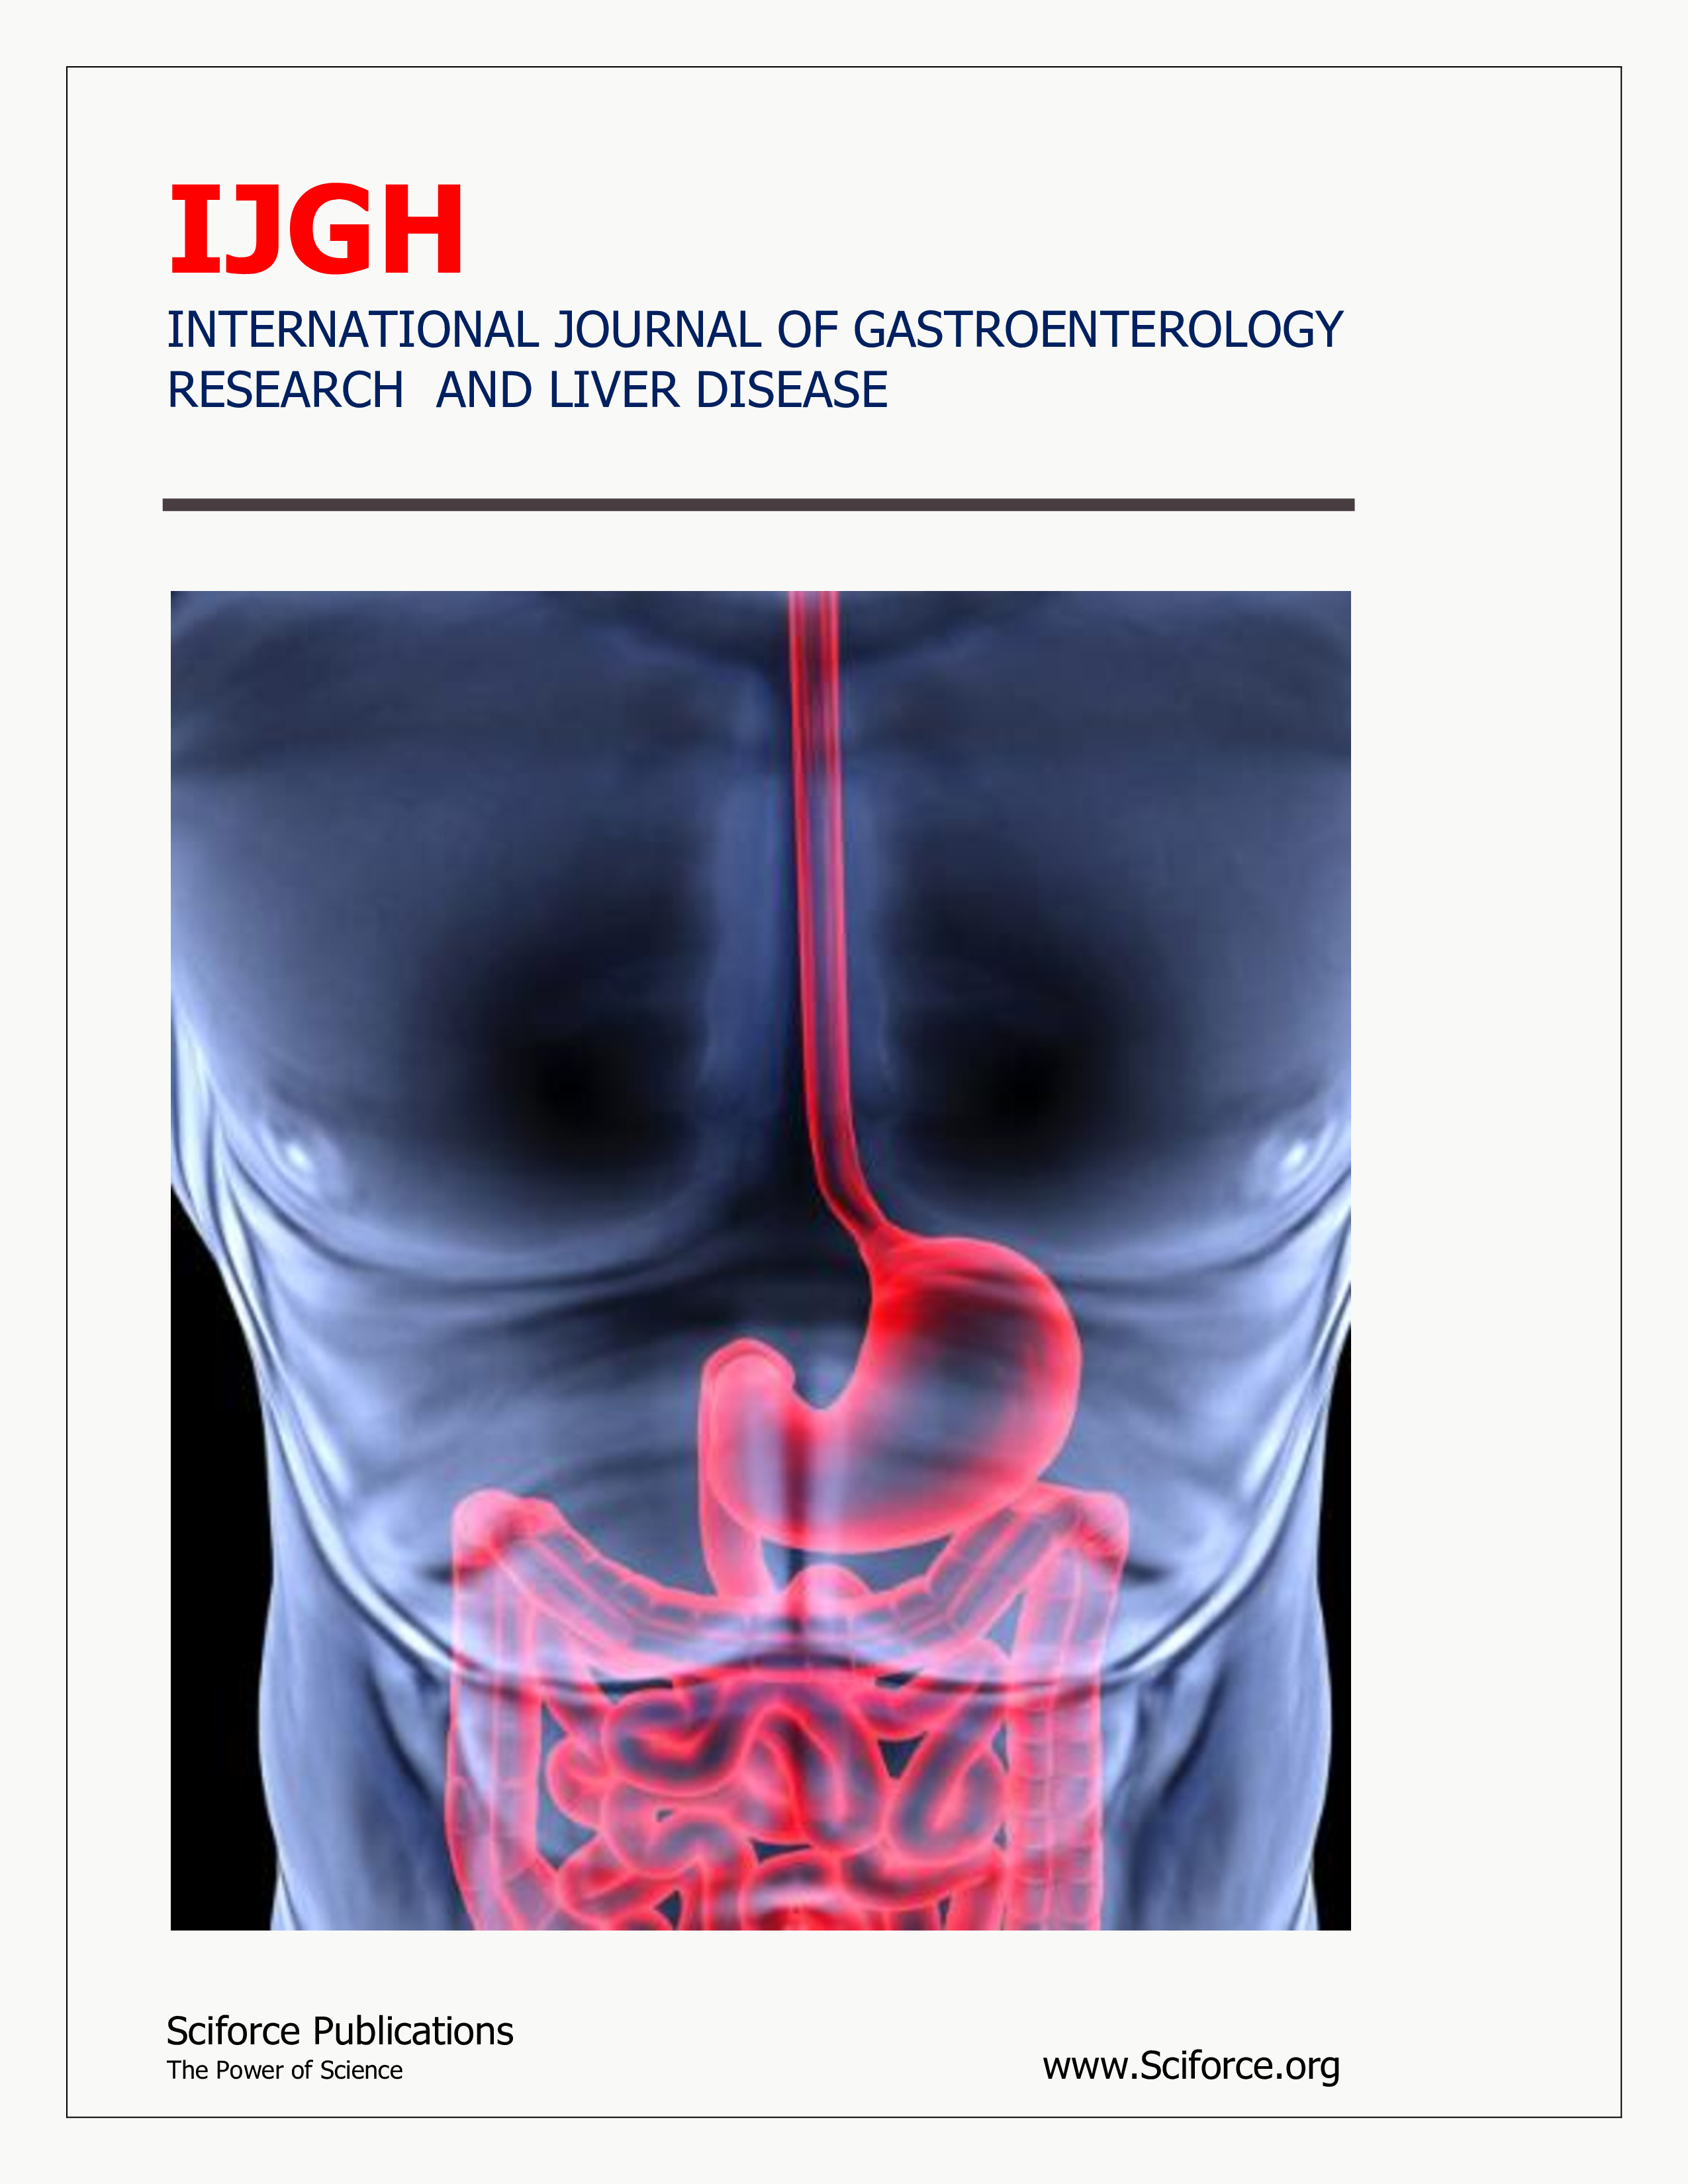 International Journal of Gastroenterology Research and Liver Disease